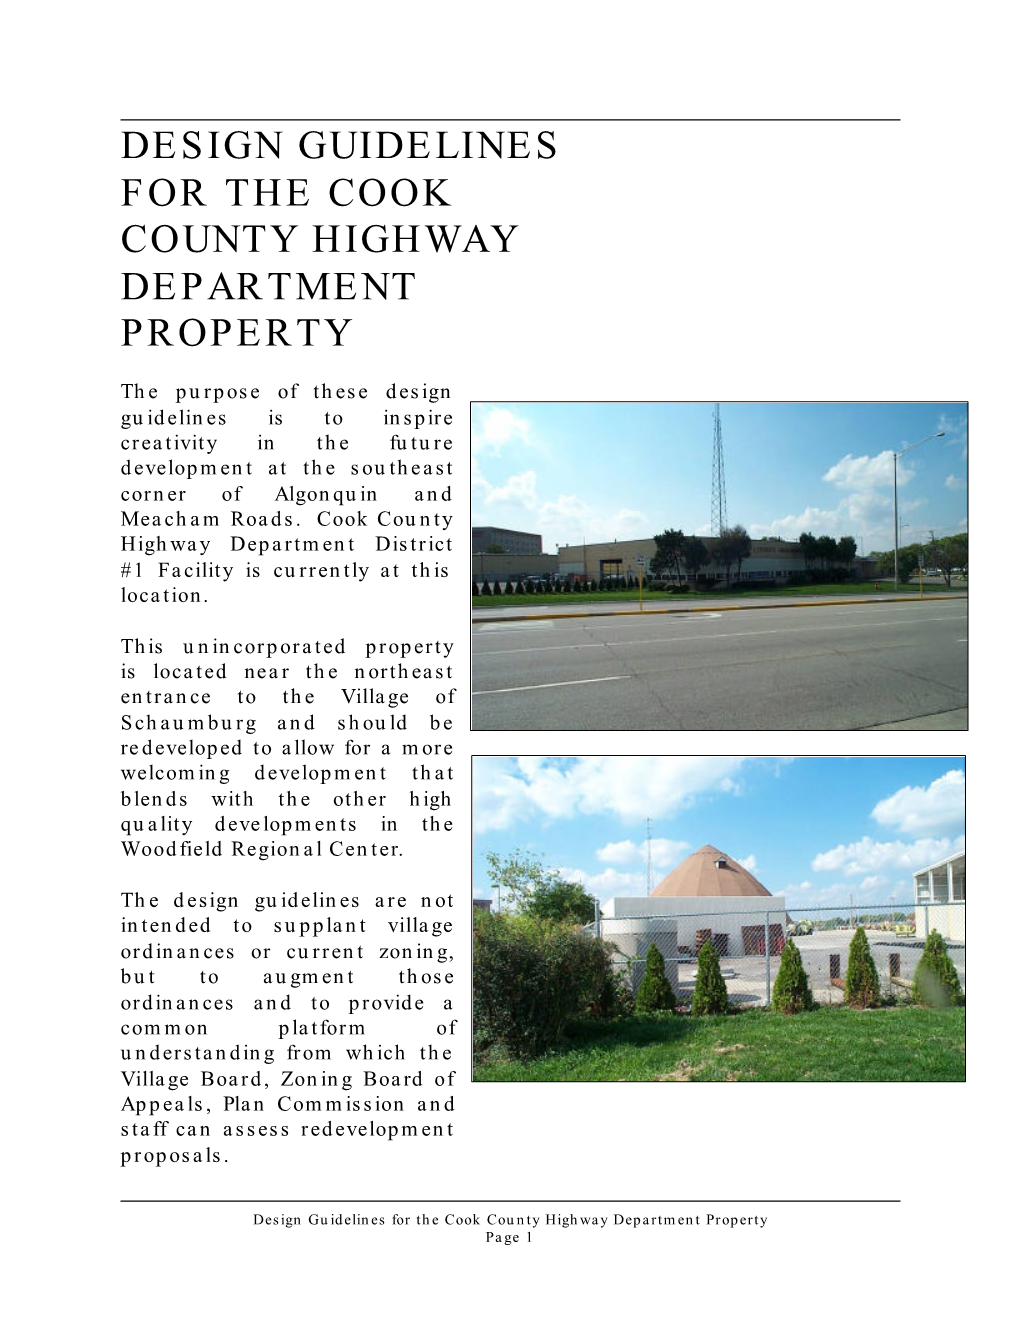 Design Guidelines for the Cook County Highway Department Property